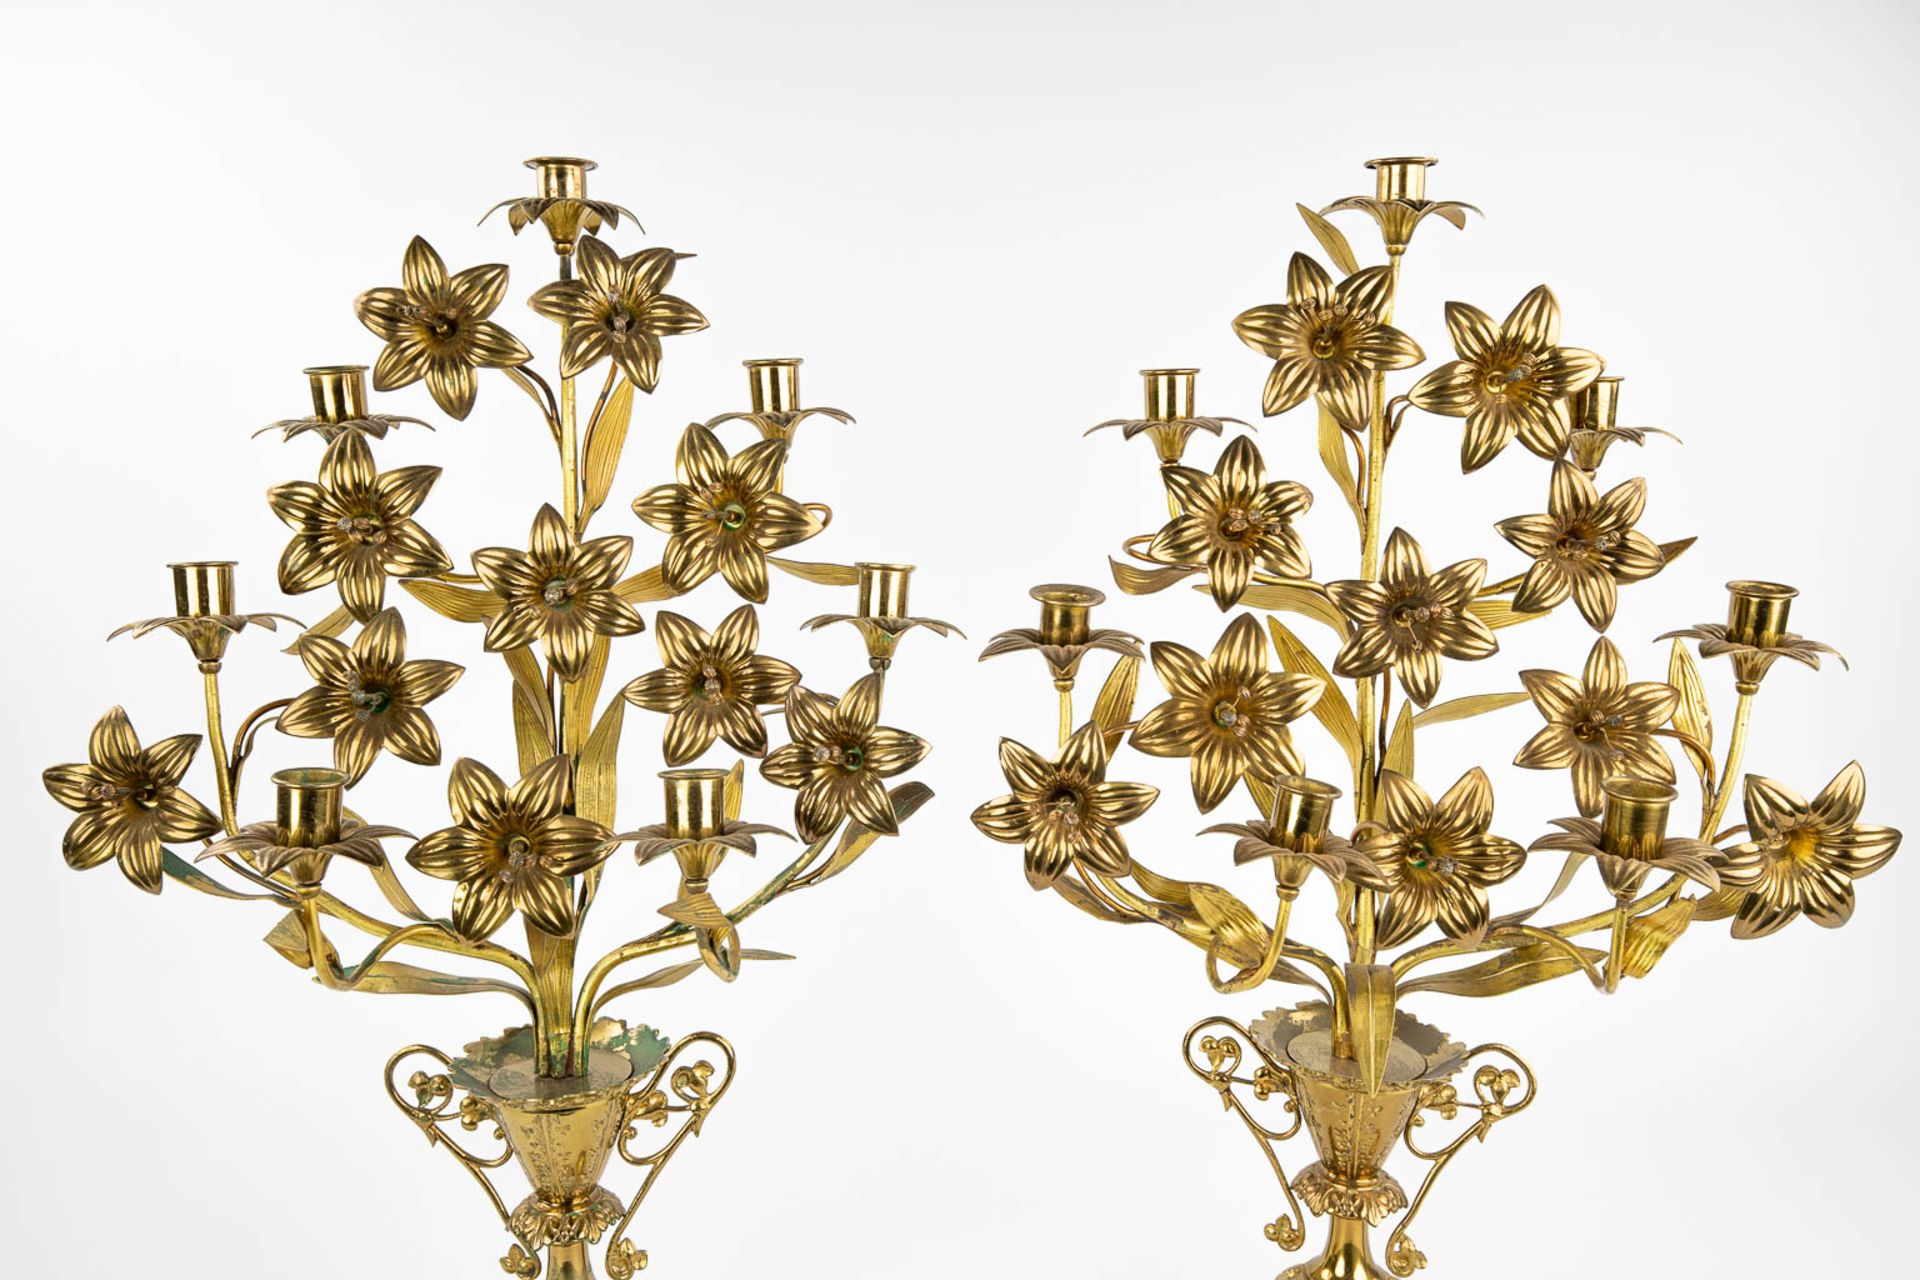 A pair of Church candlesticks, bronze and decorated with flowers. (L: 23 x W: 38 x H: 53 cm) - Image 12 of 13